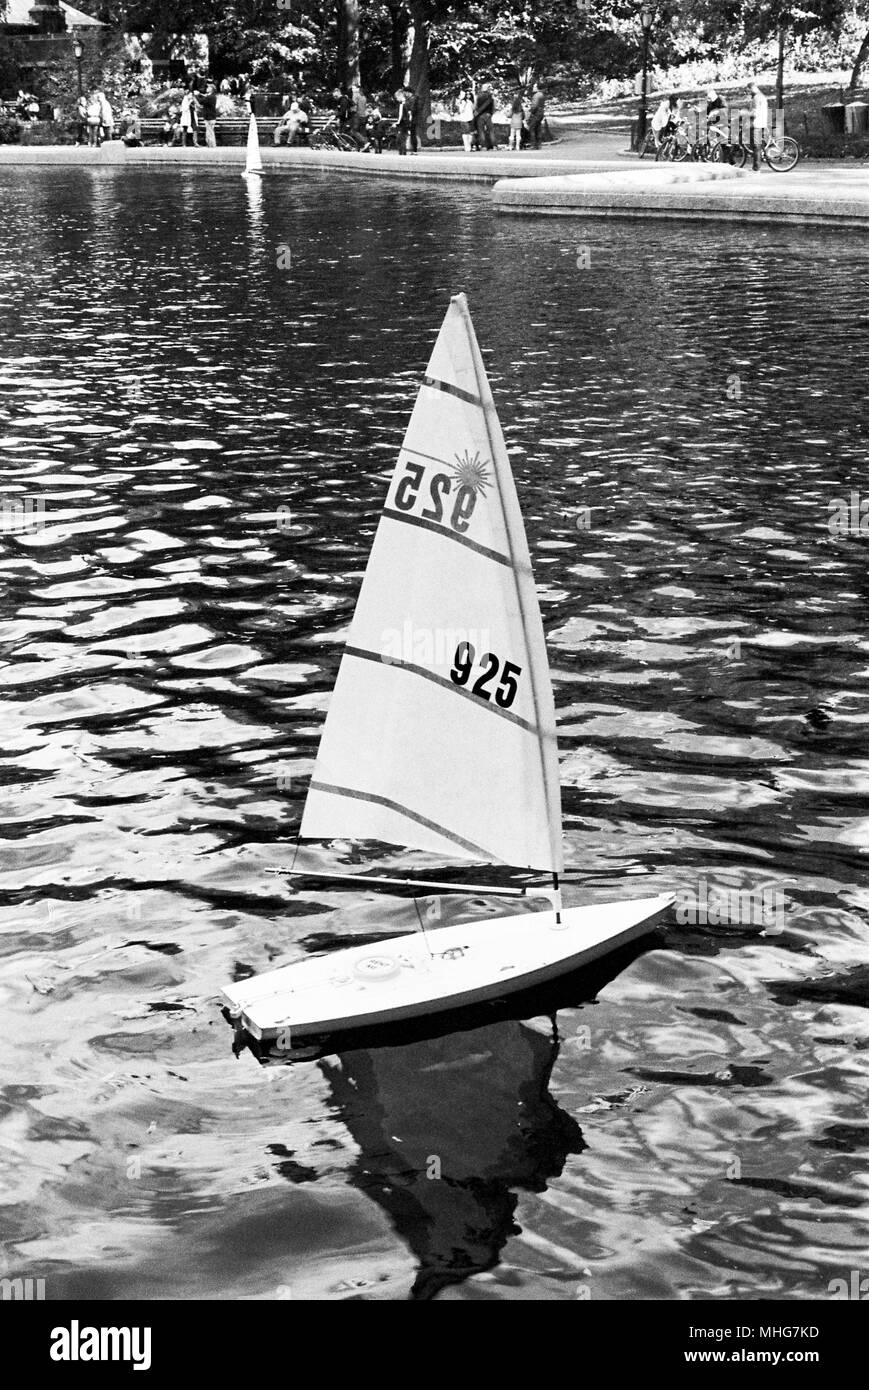 Central Park Model Boat Sailing, Conservatory Water, Central Park, New York City, United States of America. Stock Photo